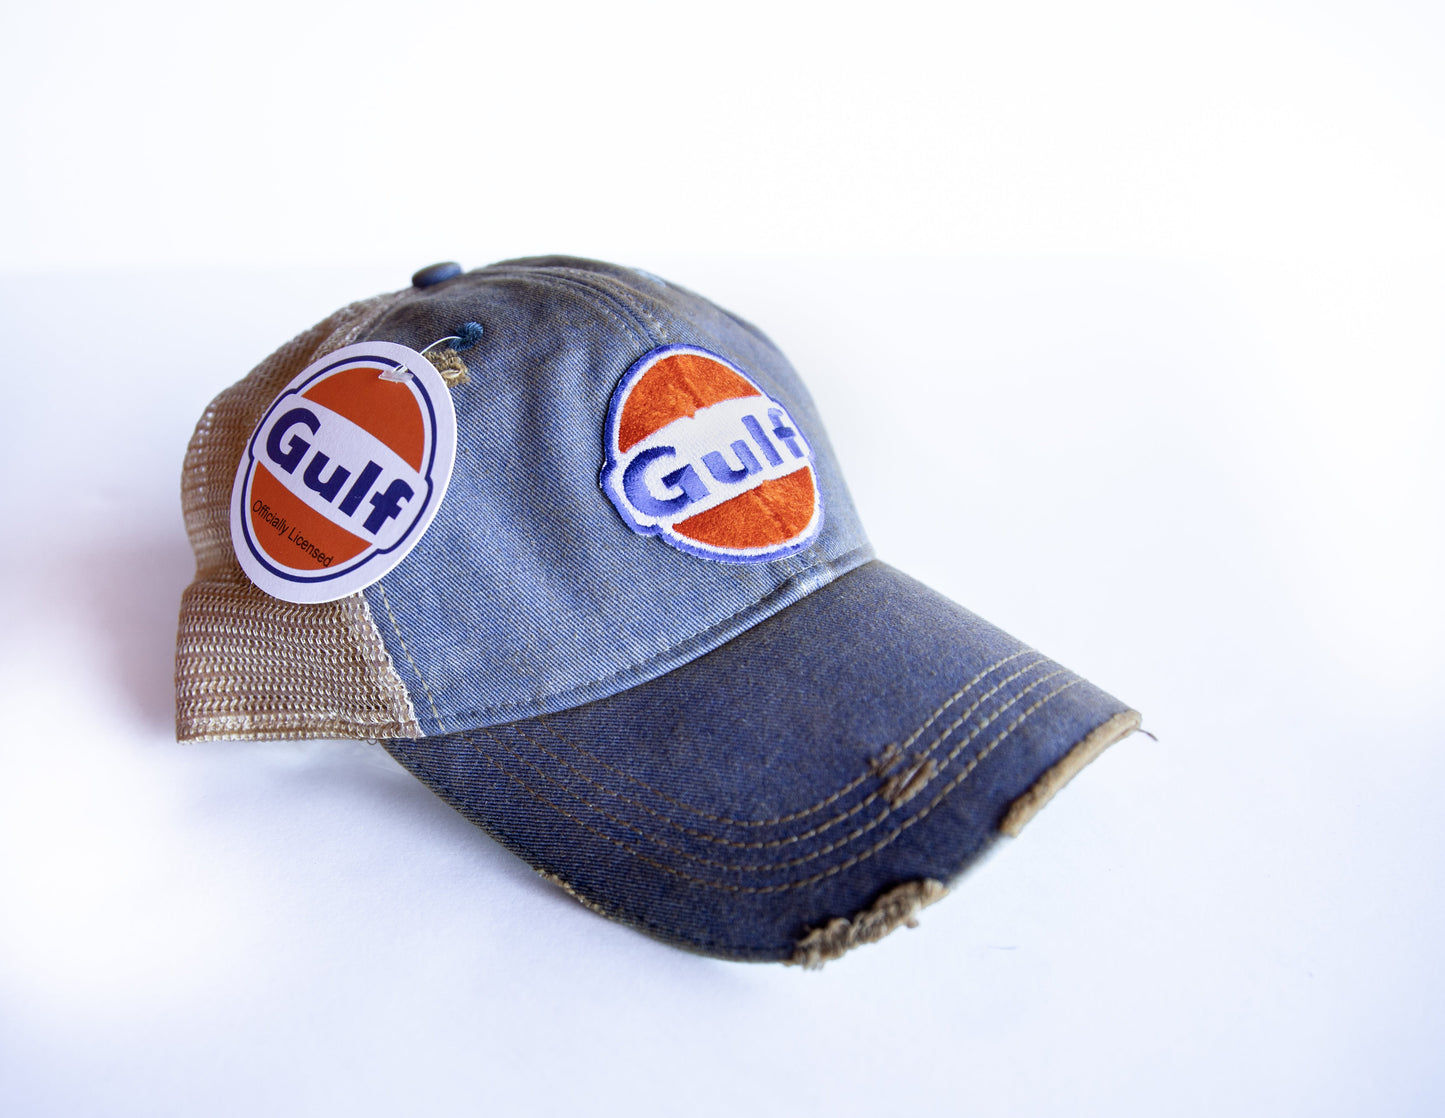 Gulf Distressed Trucker Cap Four Colors